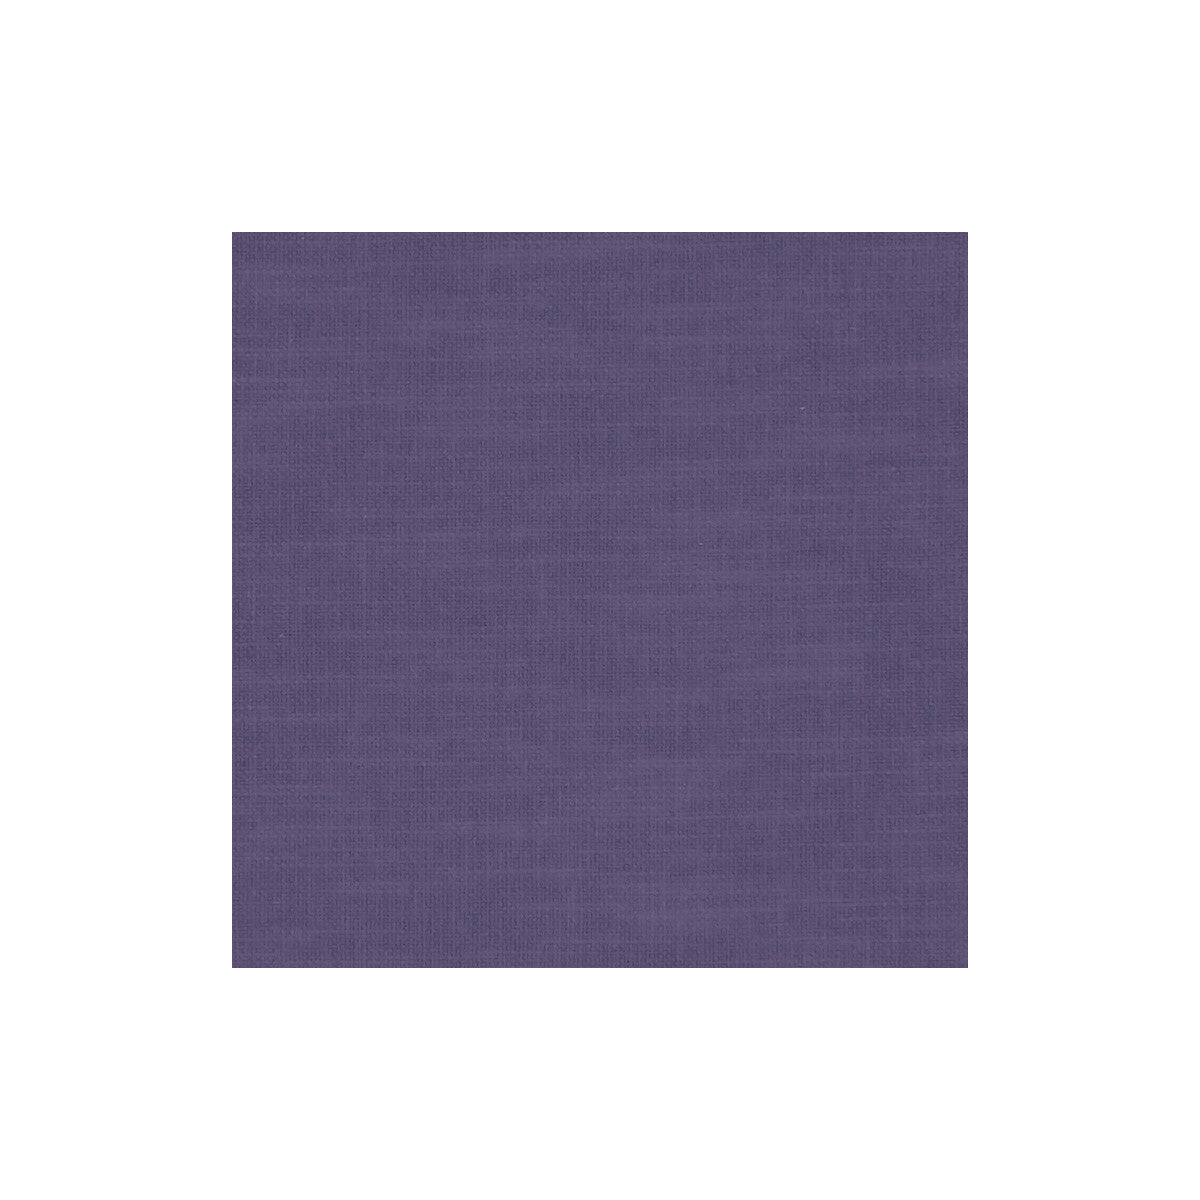 Amalfi fabric in amethyst color - pattern F1239/02.CAC.0 - by Clarke And Clarke in the Clarke &amp; Clarke Amalfi collection